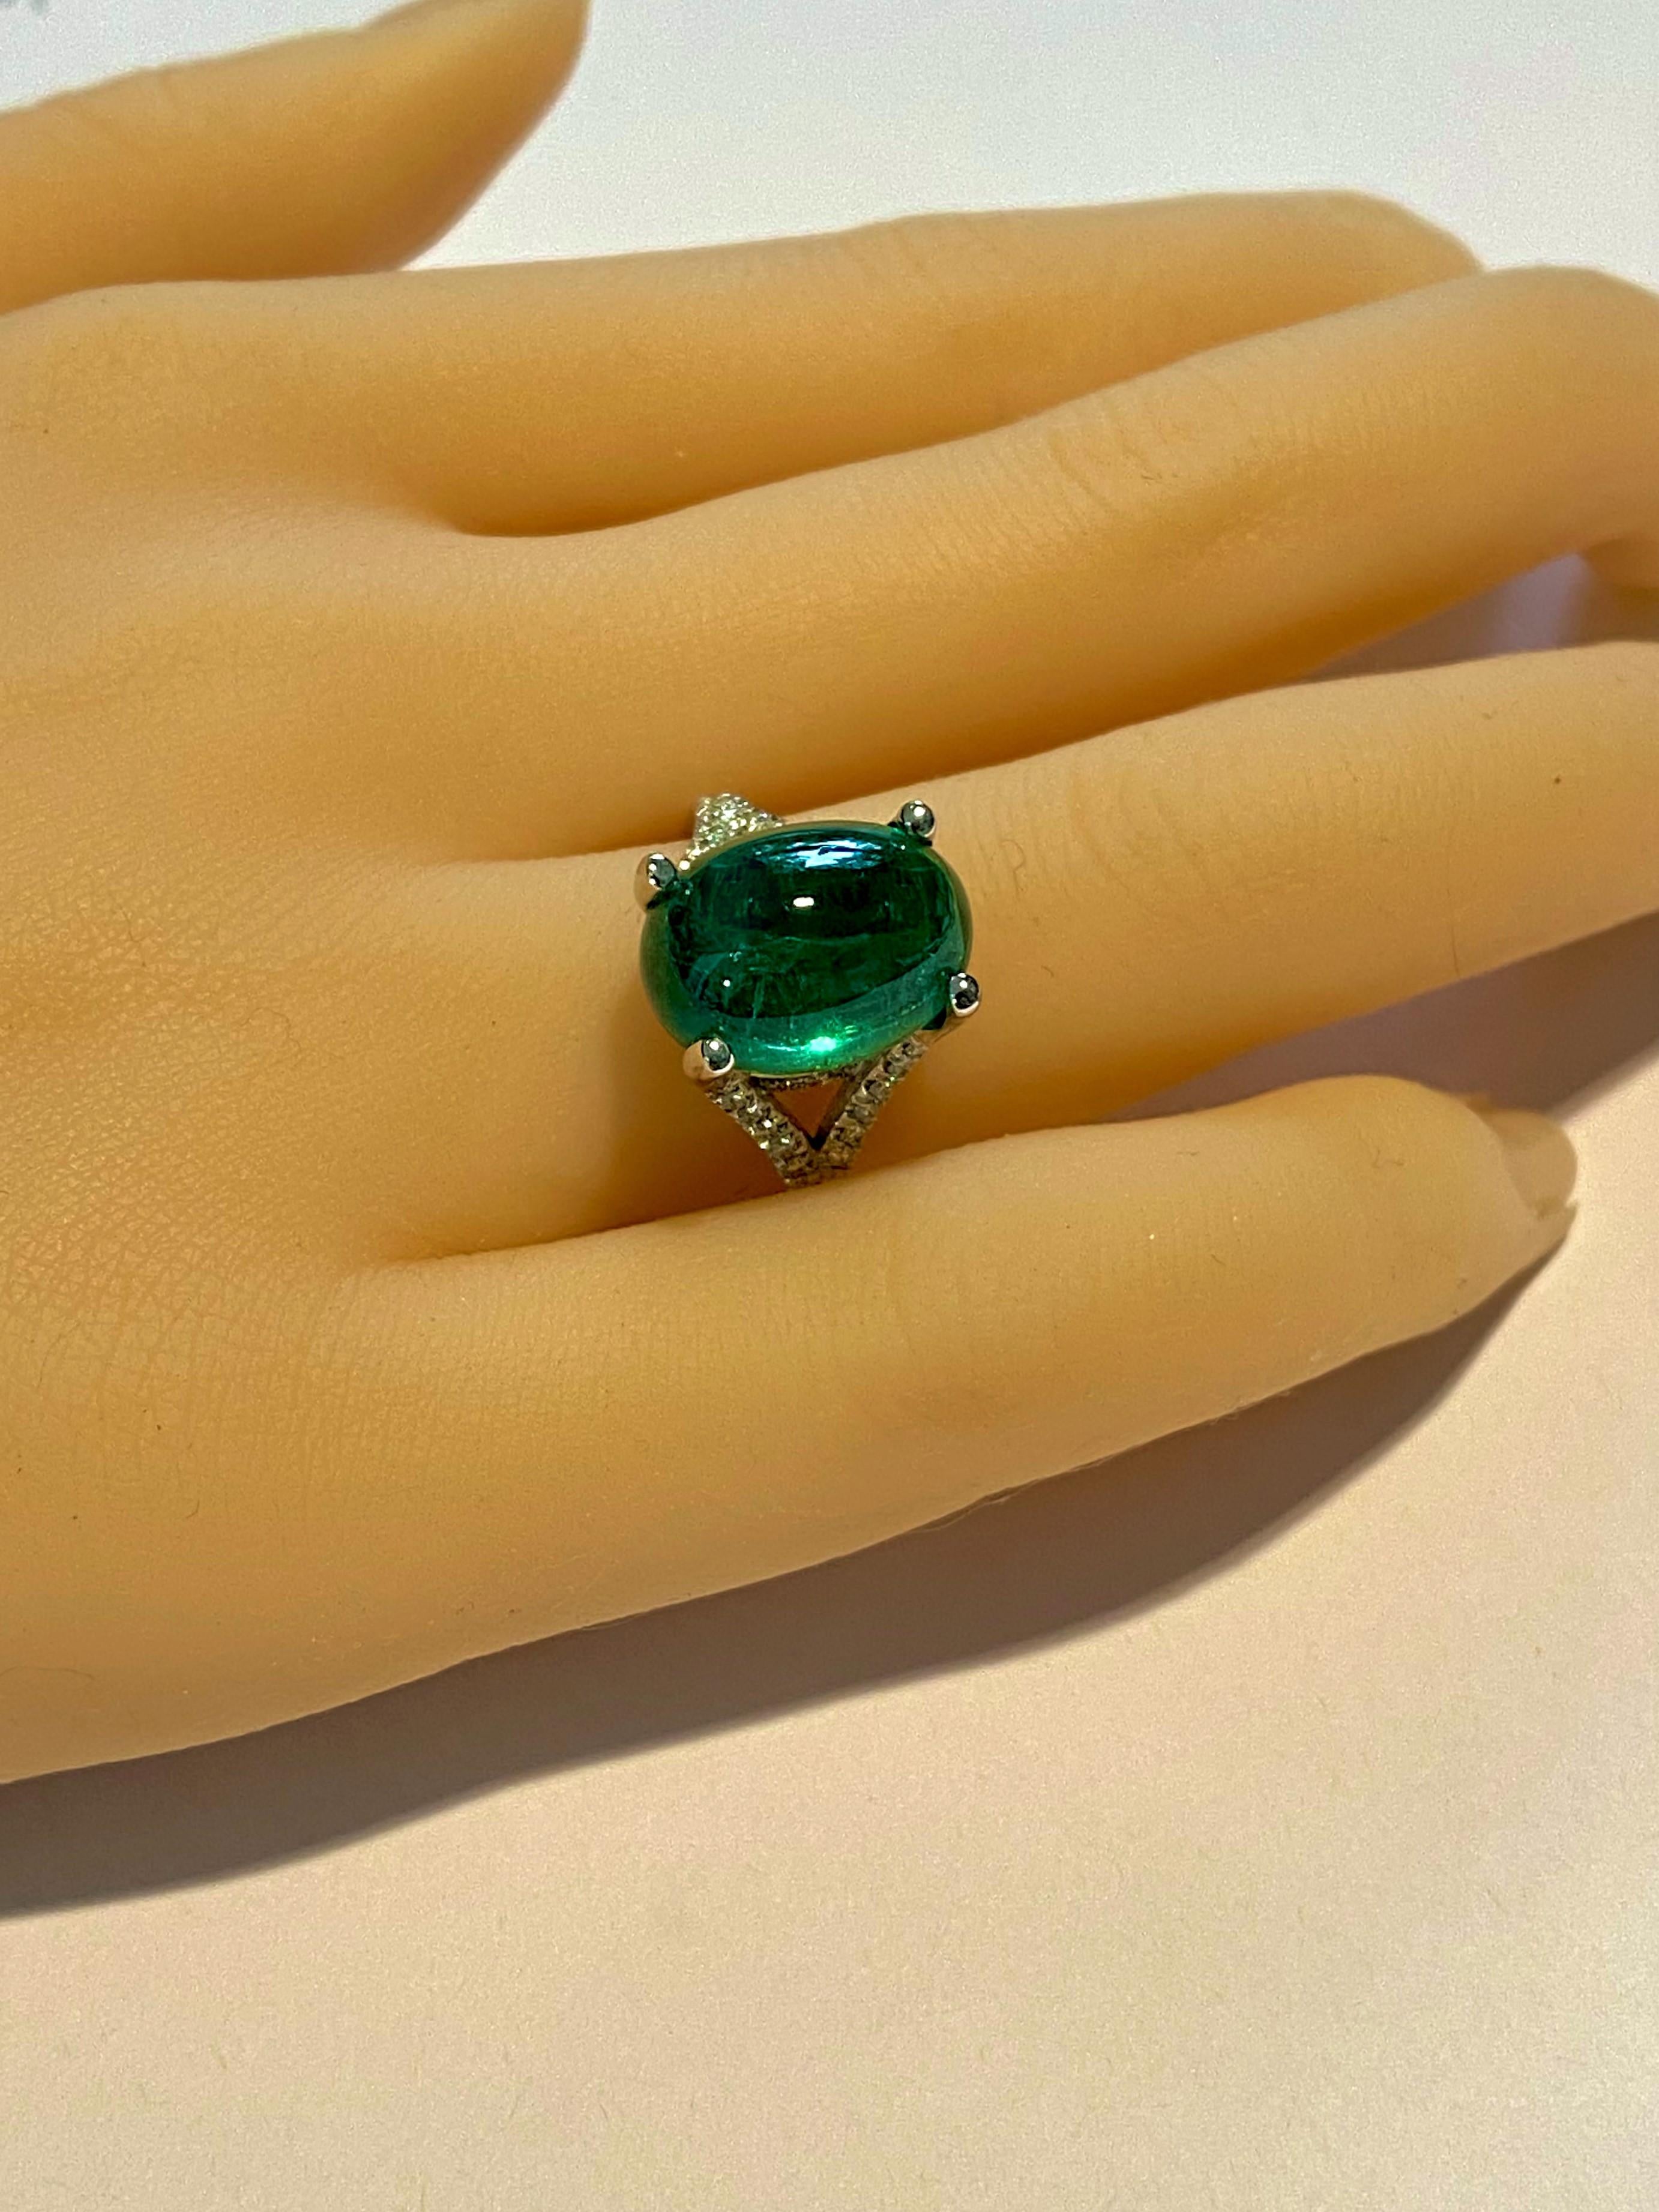 Contemporary Cabochon Colombia Emerald Diamond Cluster Gold Ring Weighing 11.05 Carat